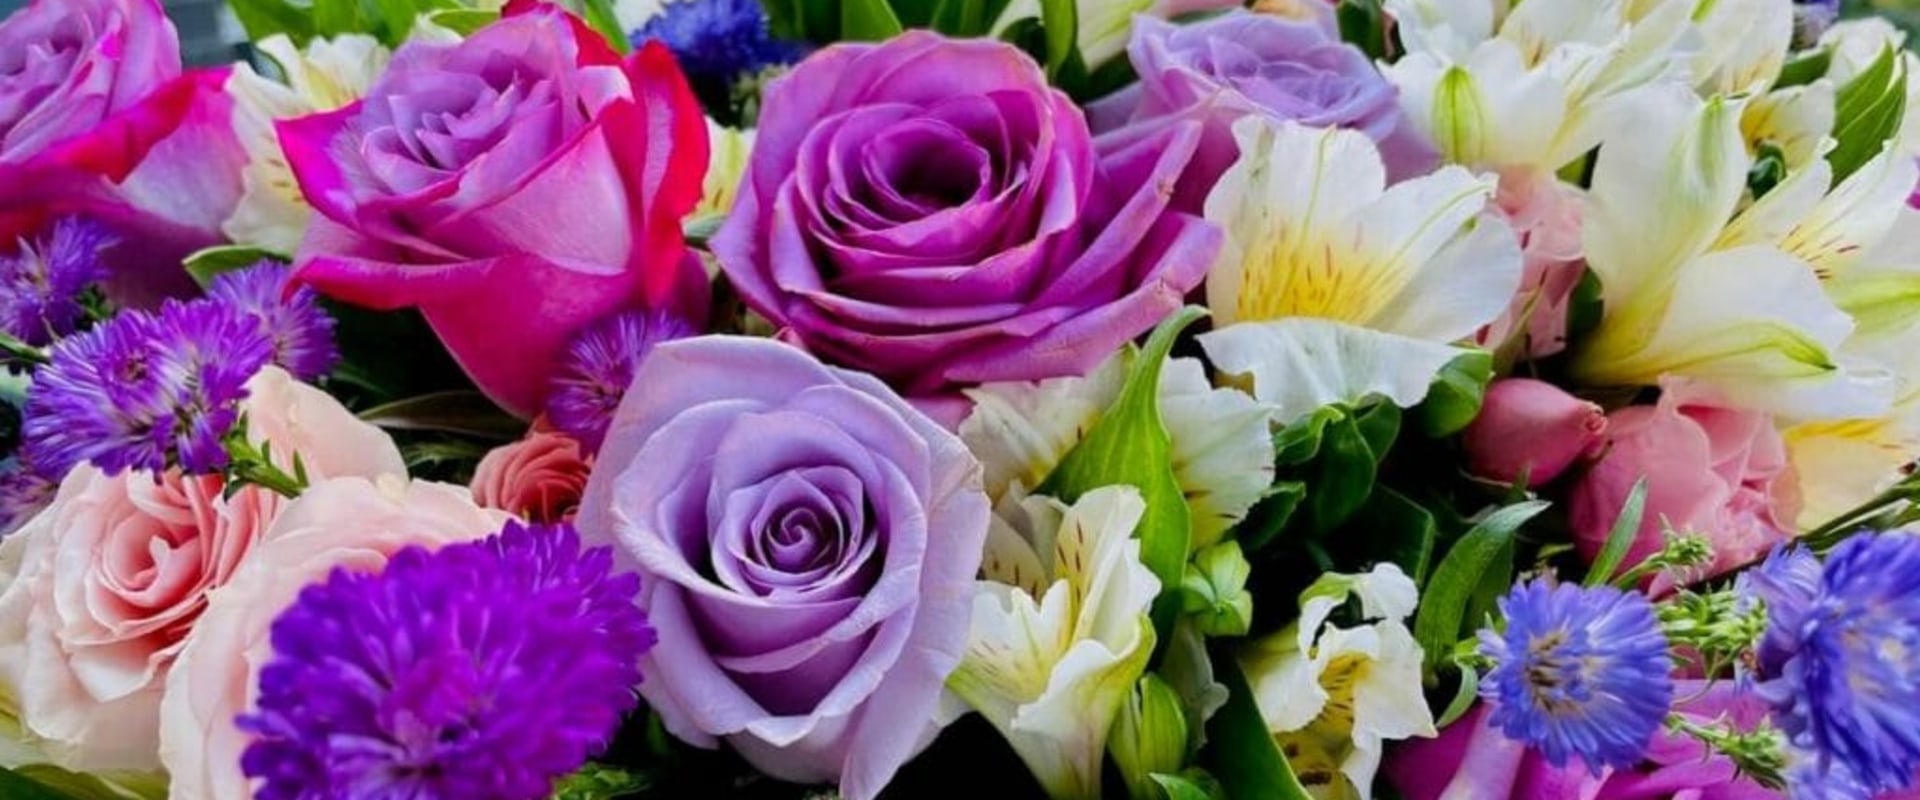 The Best Florists in Oklahoma City: Reviews and Awards